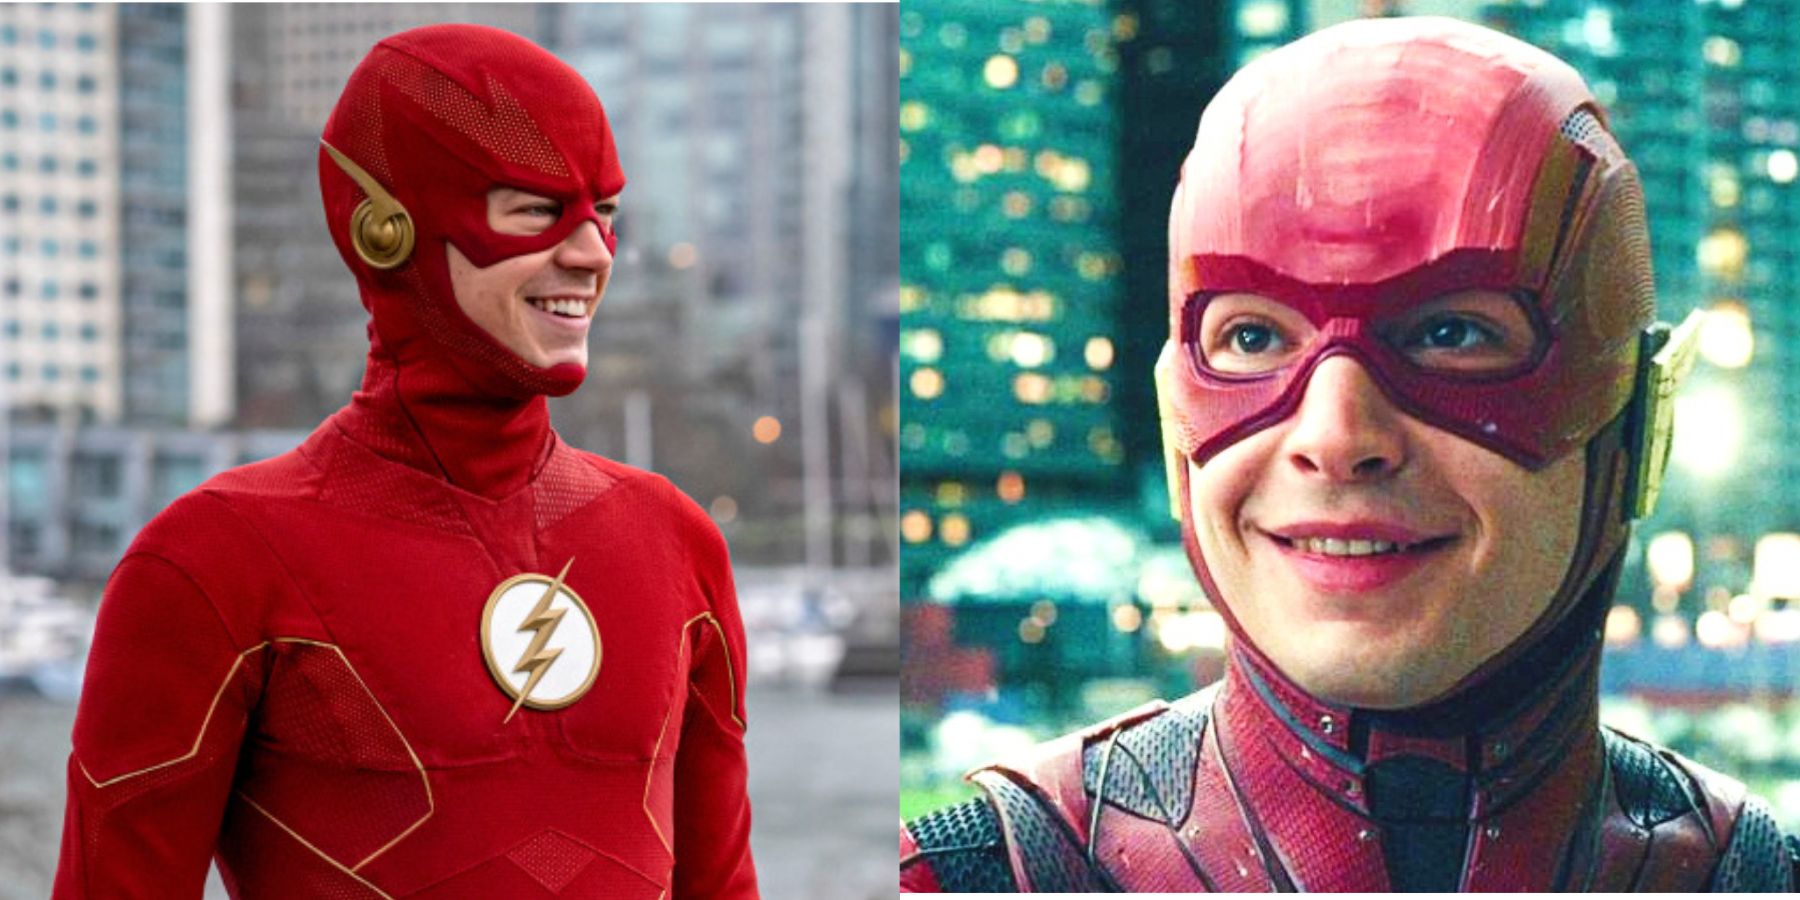 The Flash TV and movie version